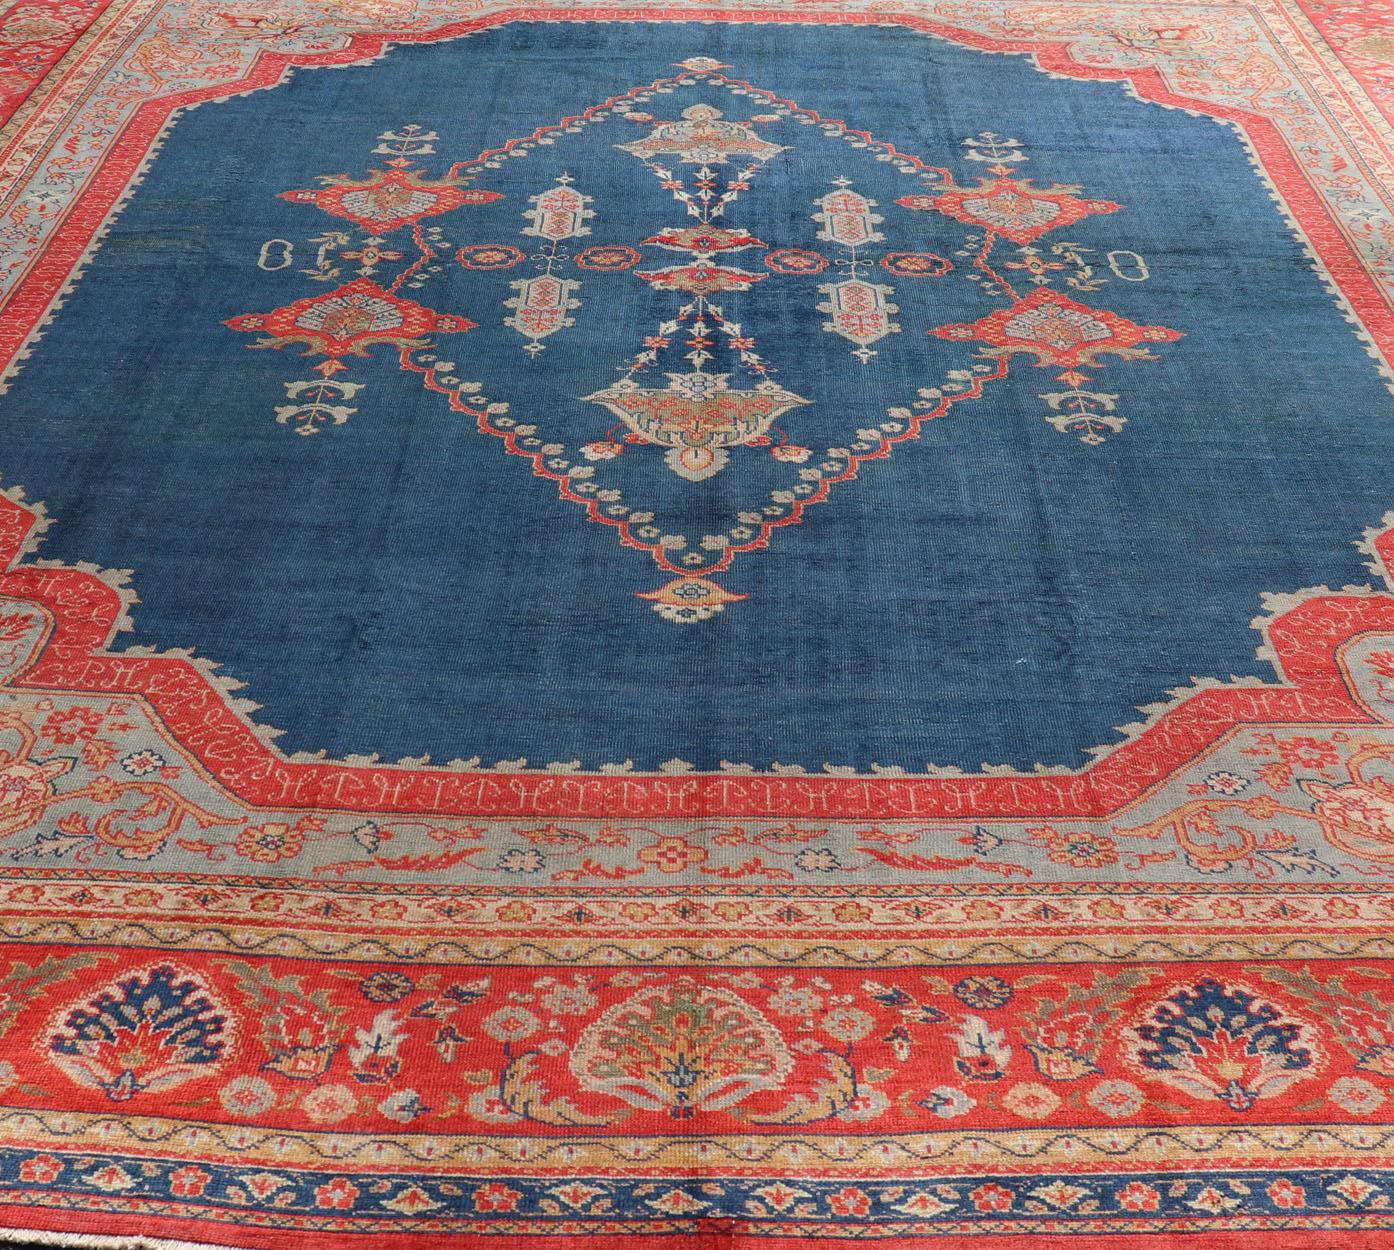 Large Antique Turkish Oushak Rug in Blue and Red with Ornate Medallion Design For Sale 2